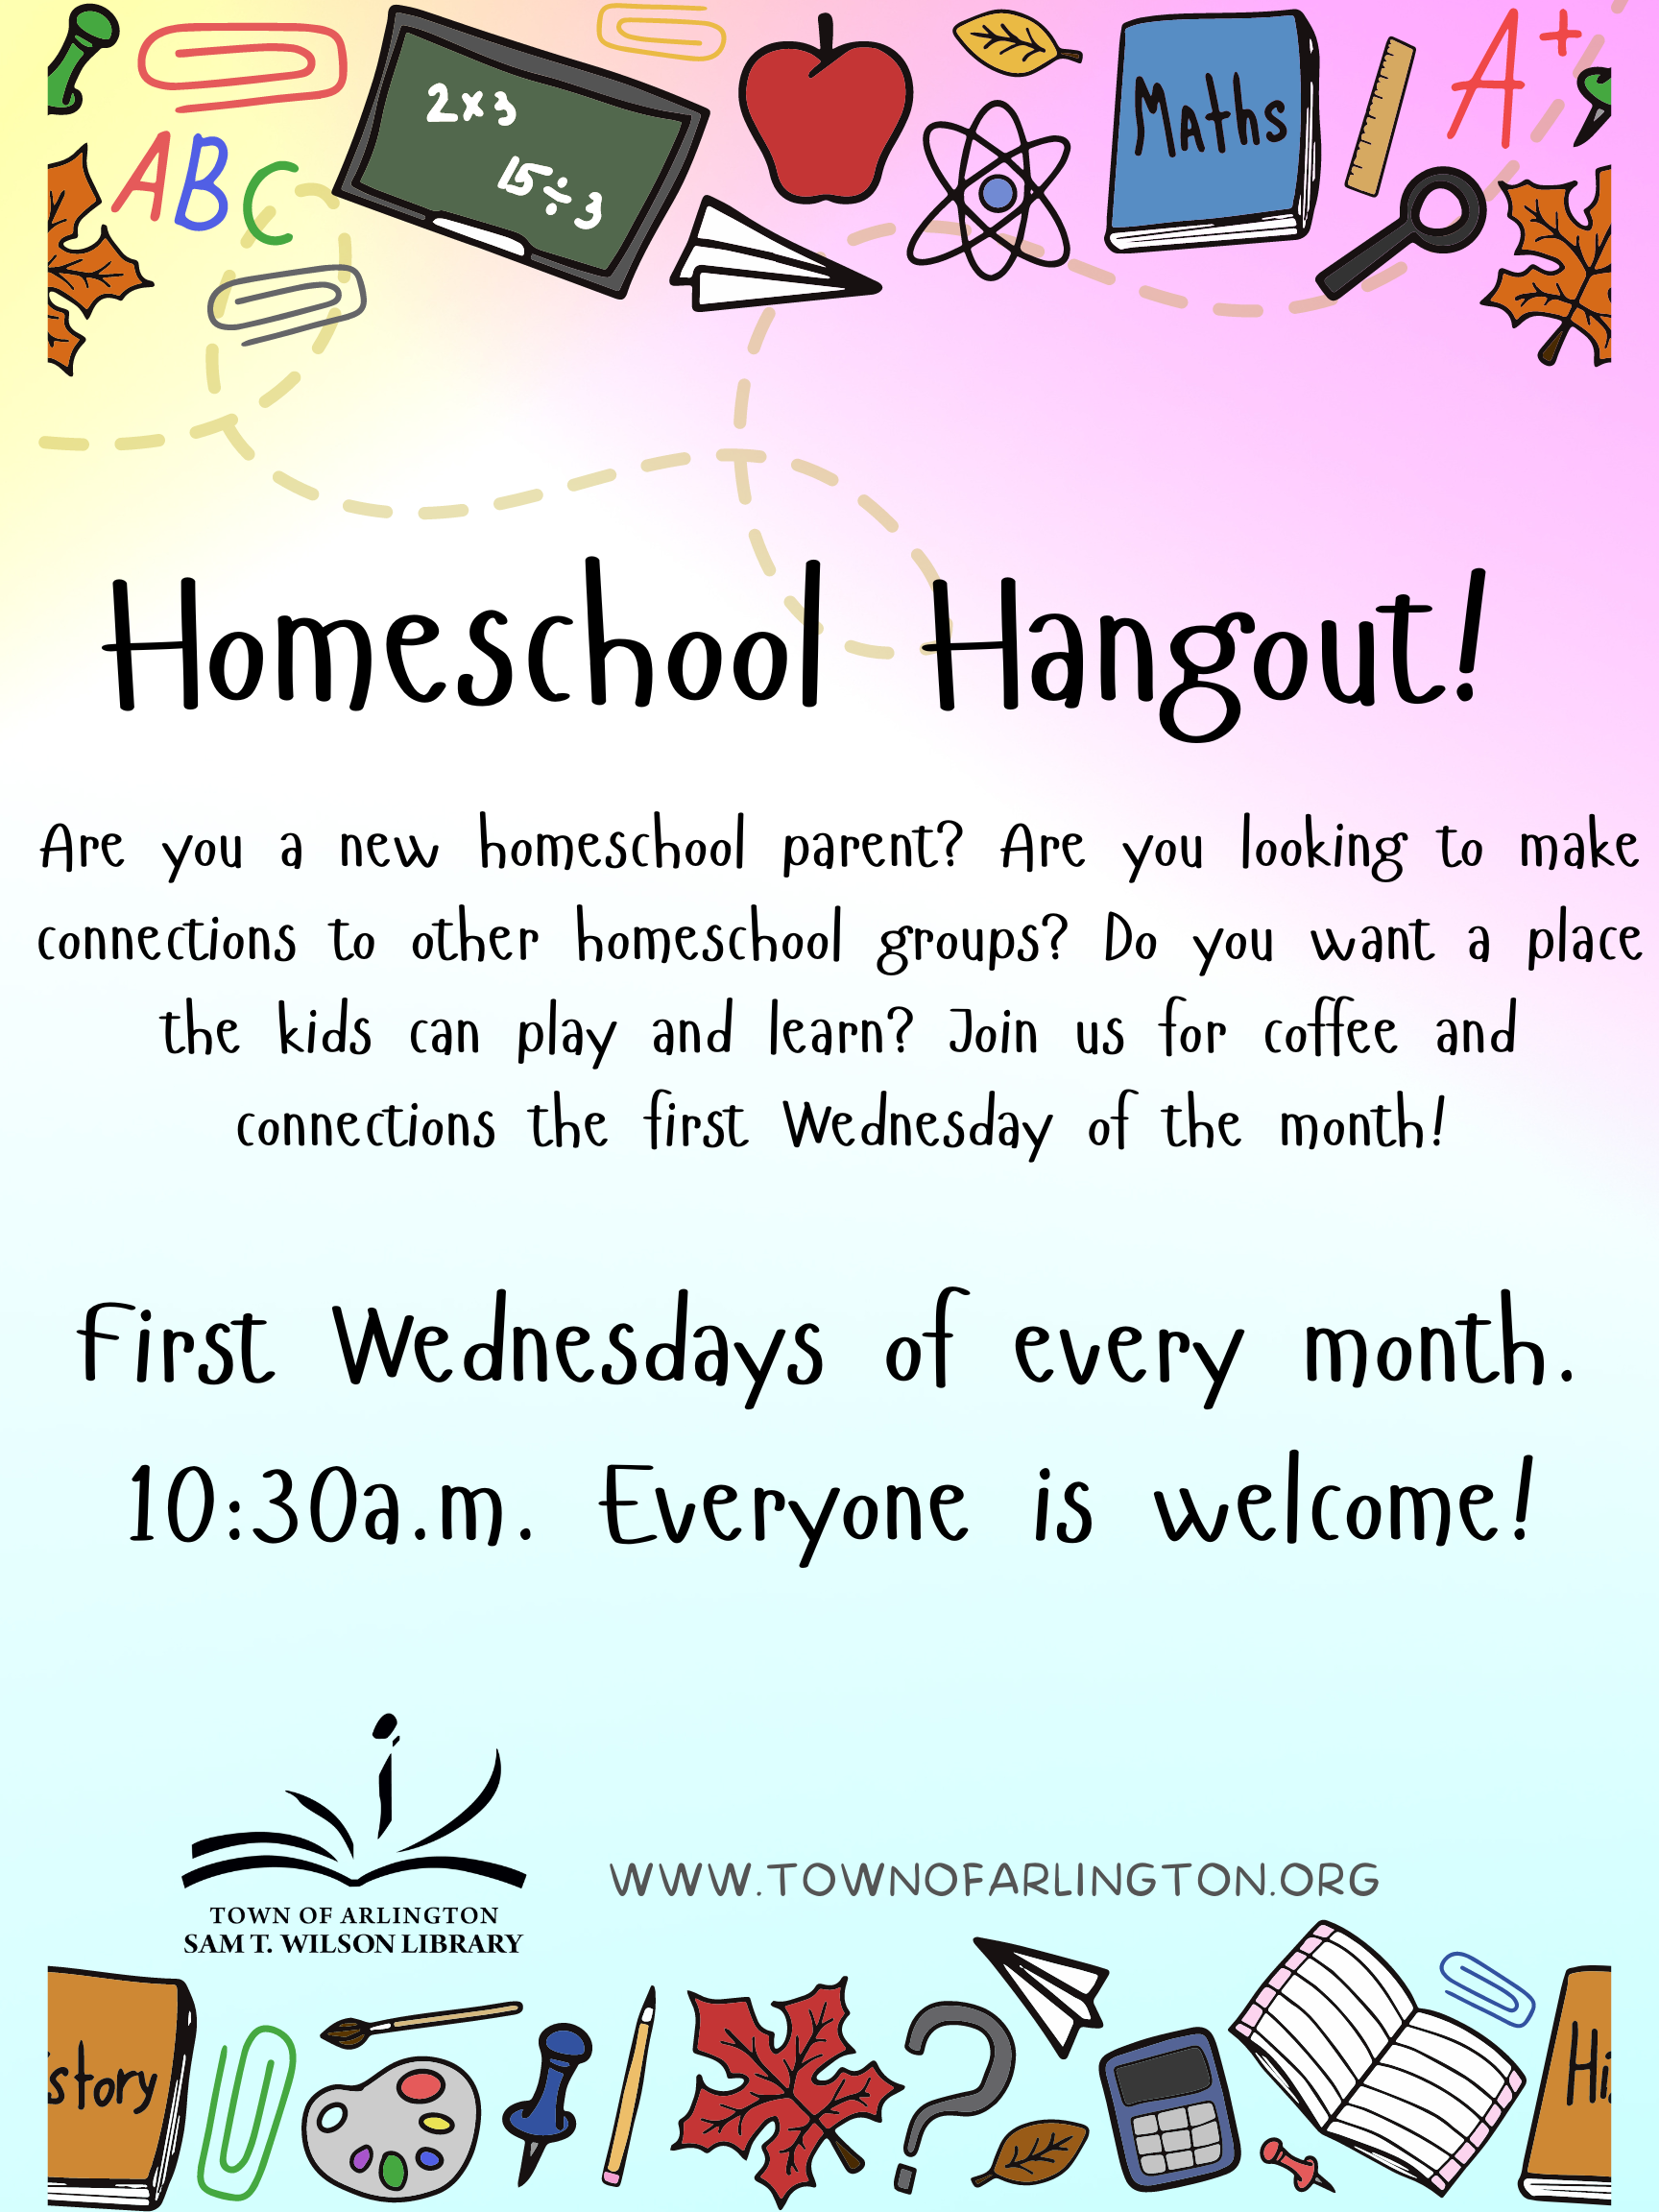 homeschool hangout flyer for first wednesday of each month at 10:30am.  join us for coffee and connections for homeschool parents looking to make connections and have a place for kids to play and learn